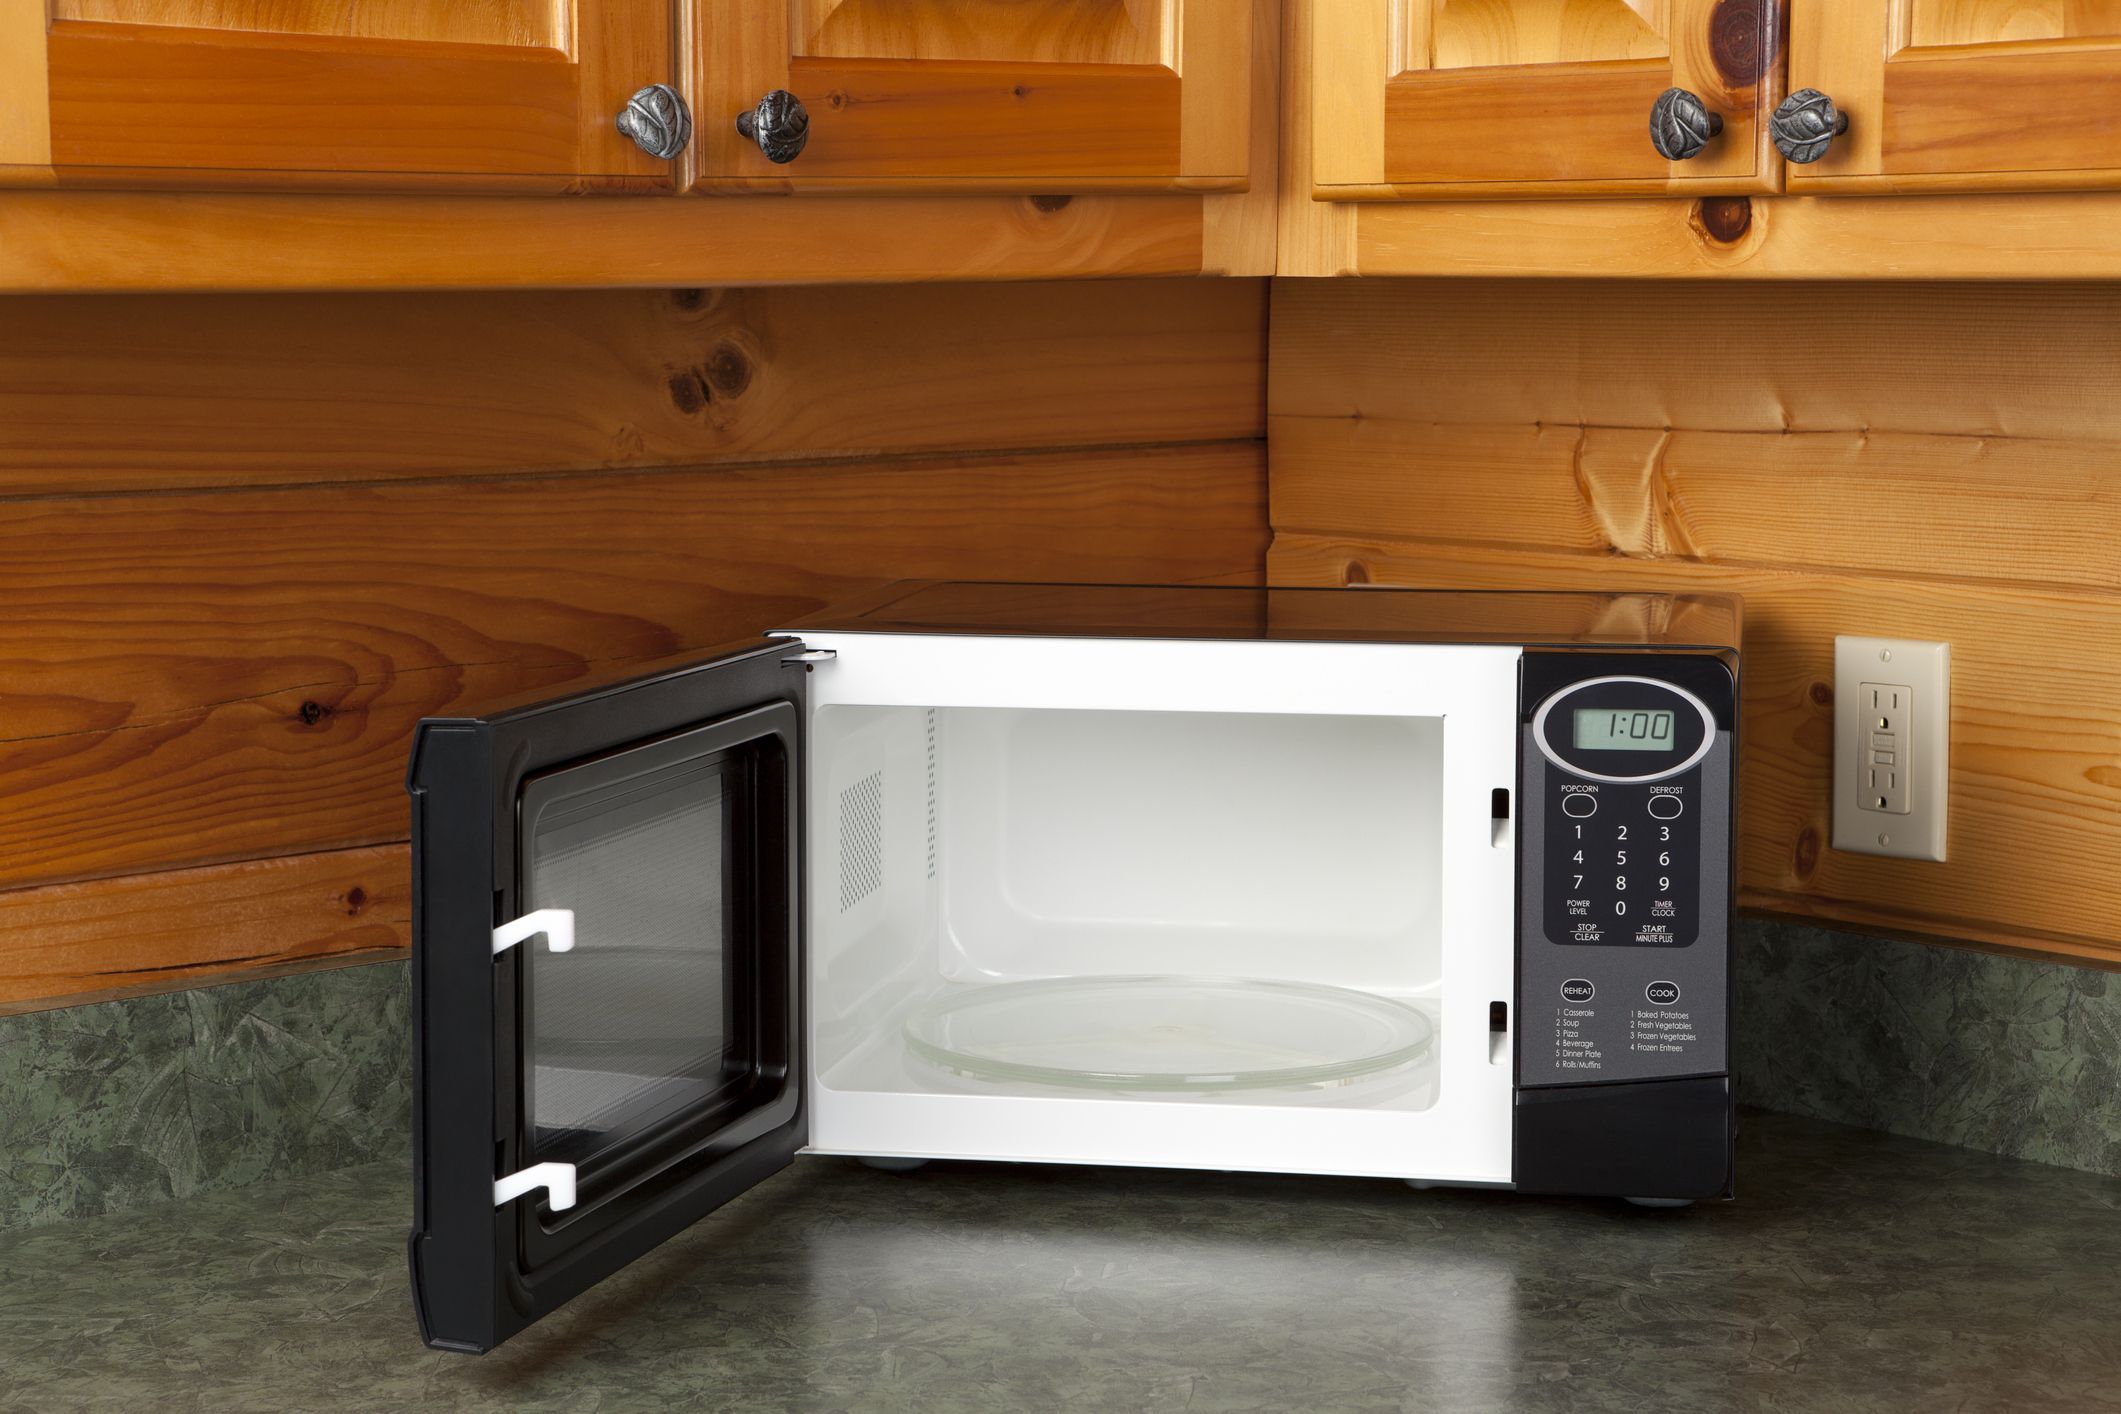 7 Simple Ways To Clean A Microwave